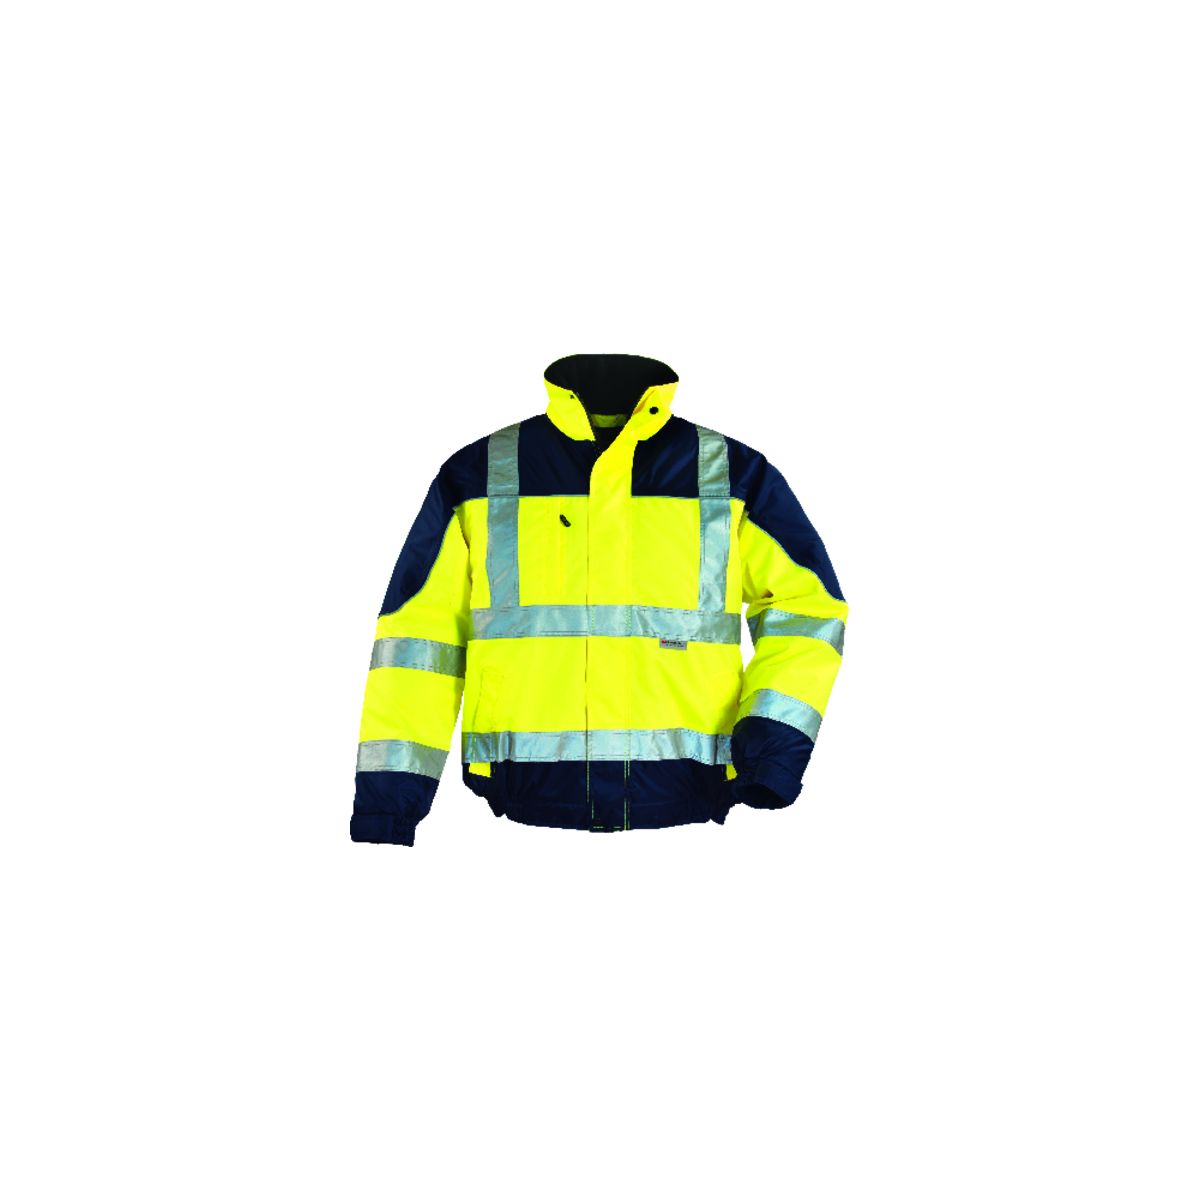 AIRPORT Blouson Jaune HV/Marine, Polyester Oxford 300D - COVERGUARD - Taille M 0